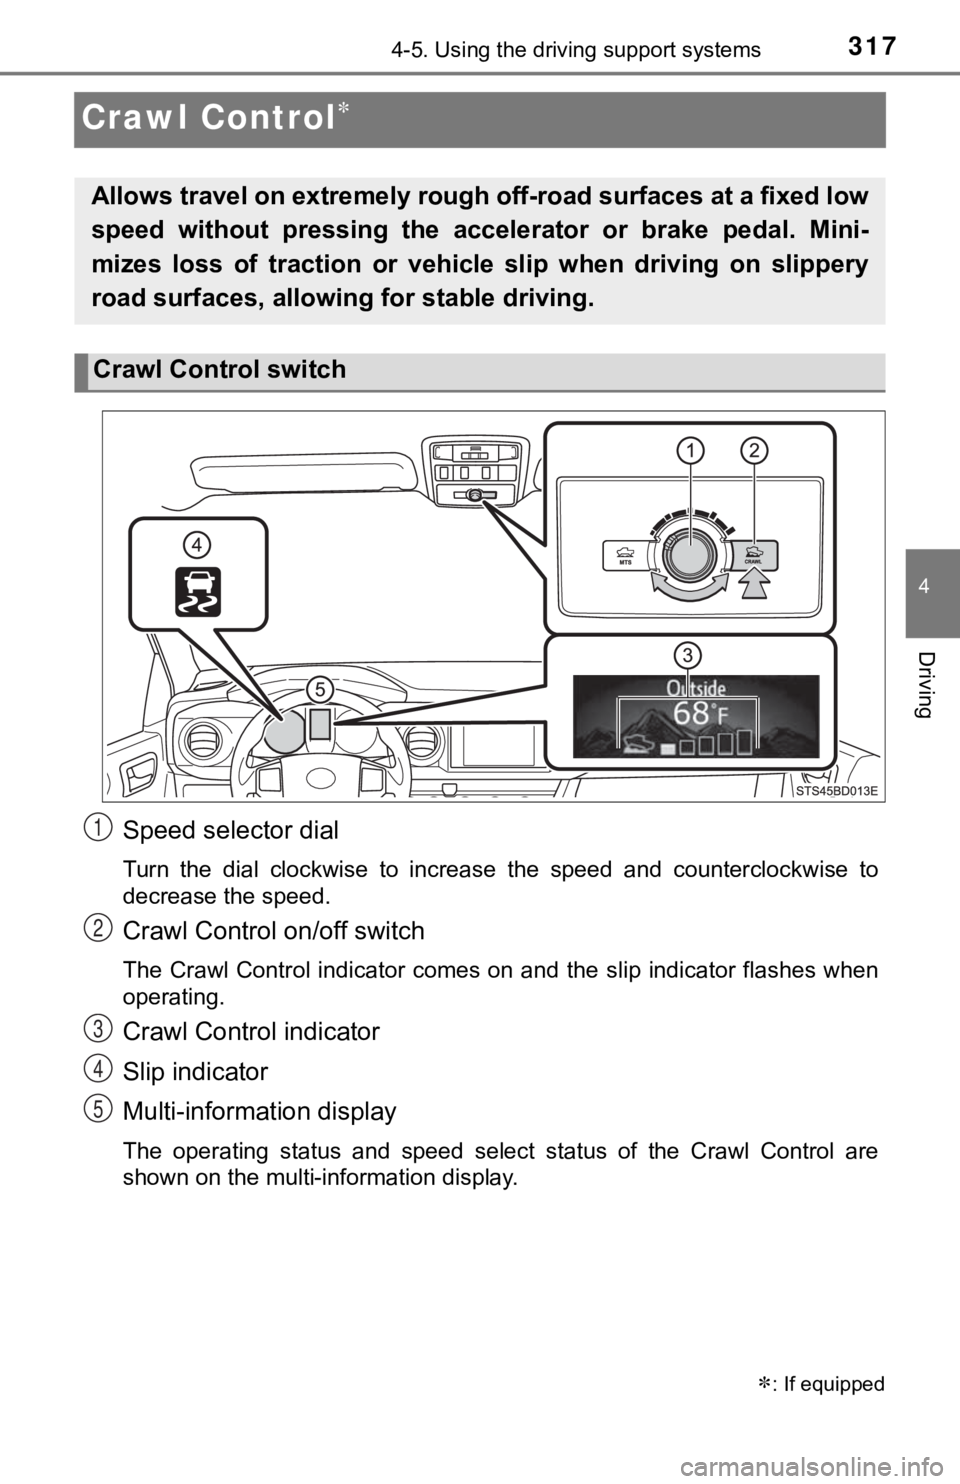 TOYOTA TACOMA 2022  Owners Manual 3174-5. Using the driving support systems
4
Driving
Crawl Control
Speed selector dial
Turn  the  dial  clockwise  to  increase  the  speed  and  counterclockwise  to
decrease the speed.
Crawl Contr